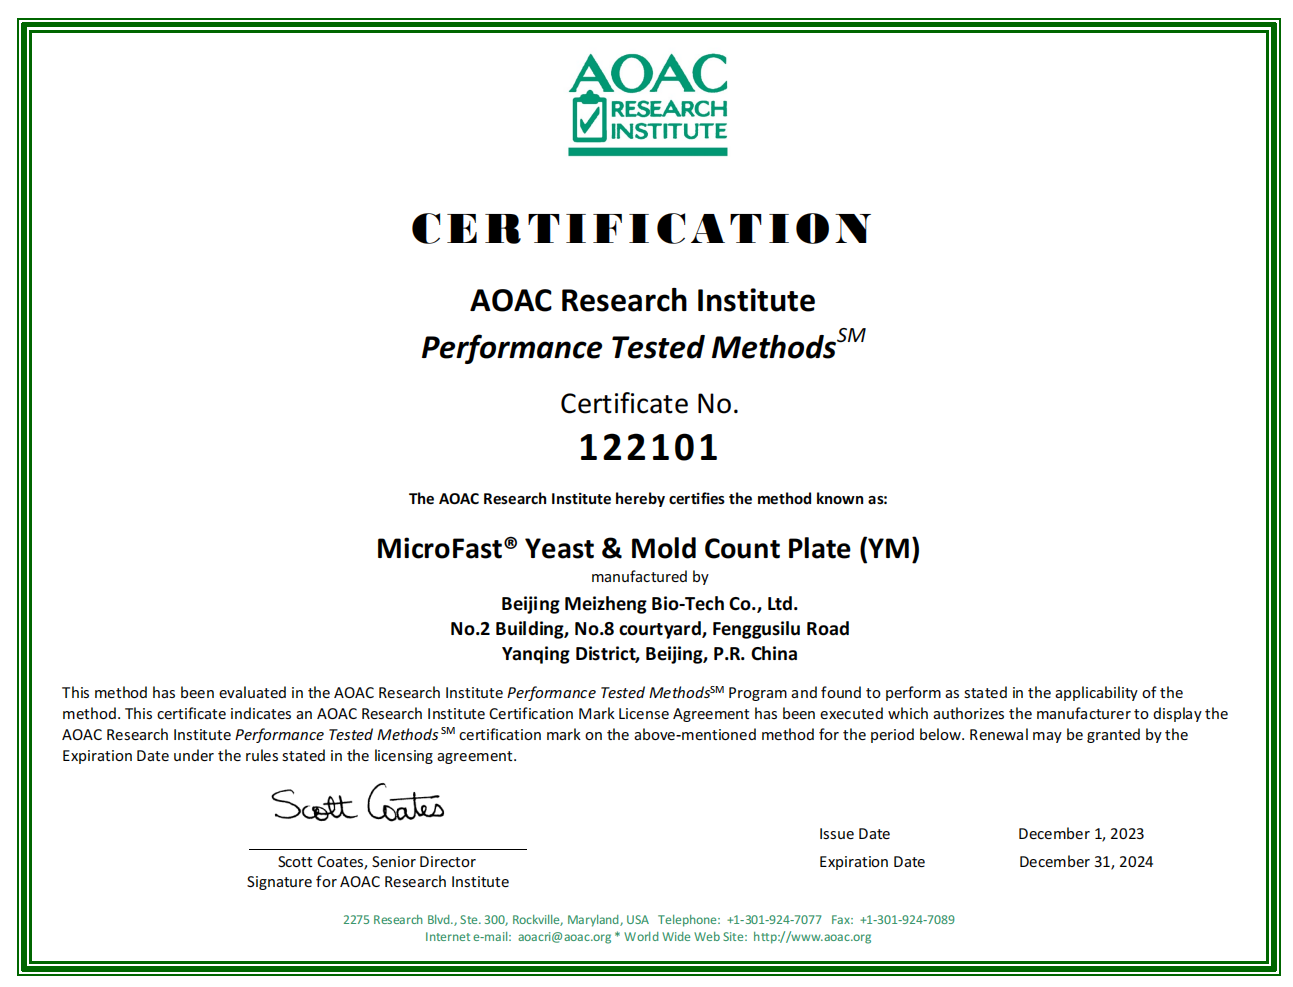 AOAC Certificate of Microfast® Yeast & Mold Count Plate (YM)